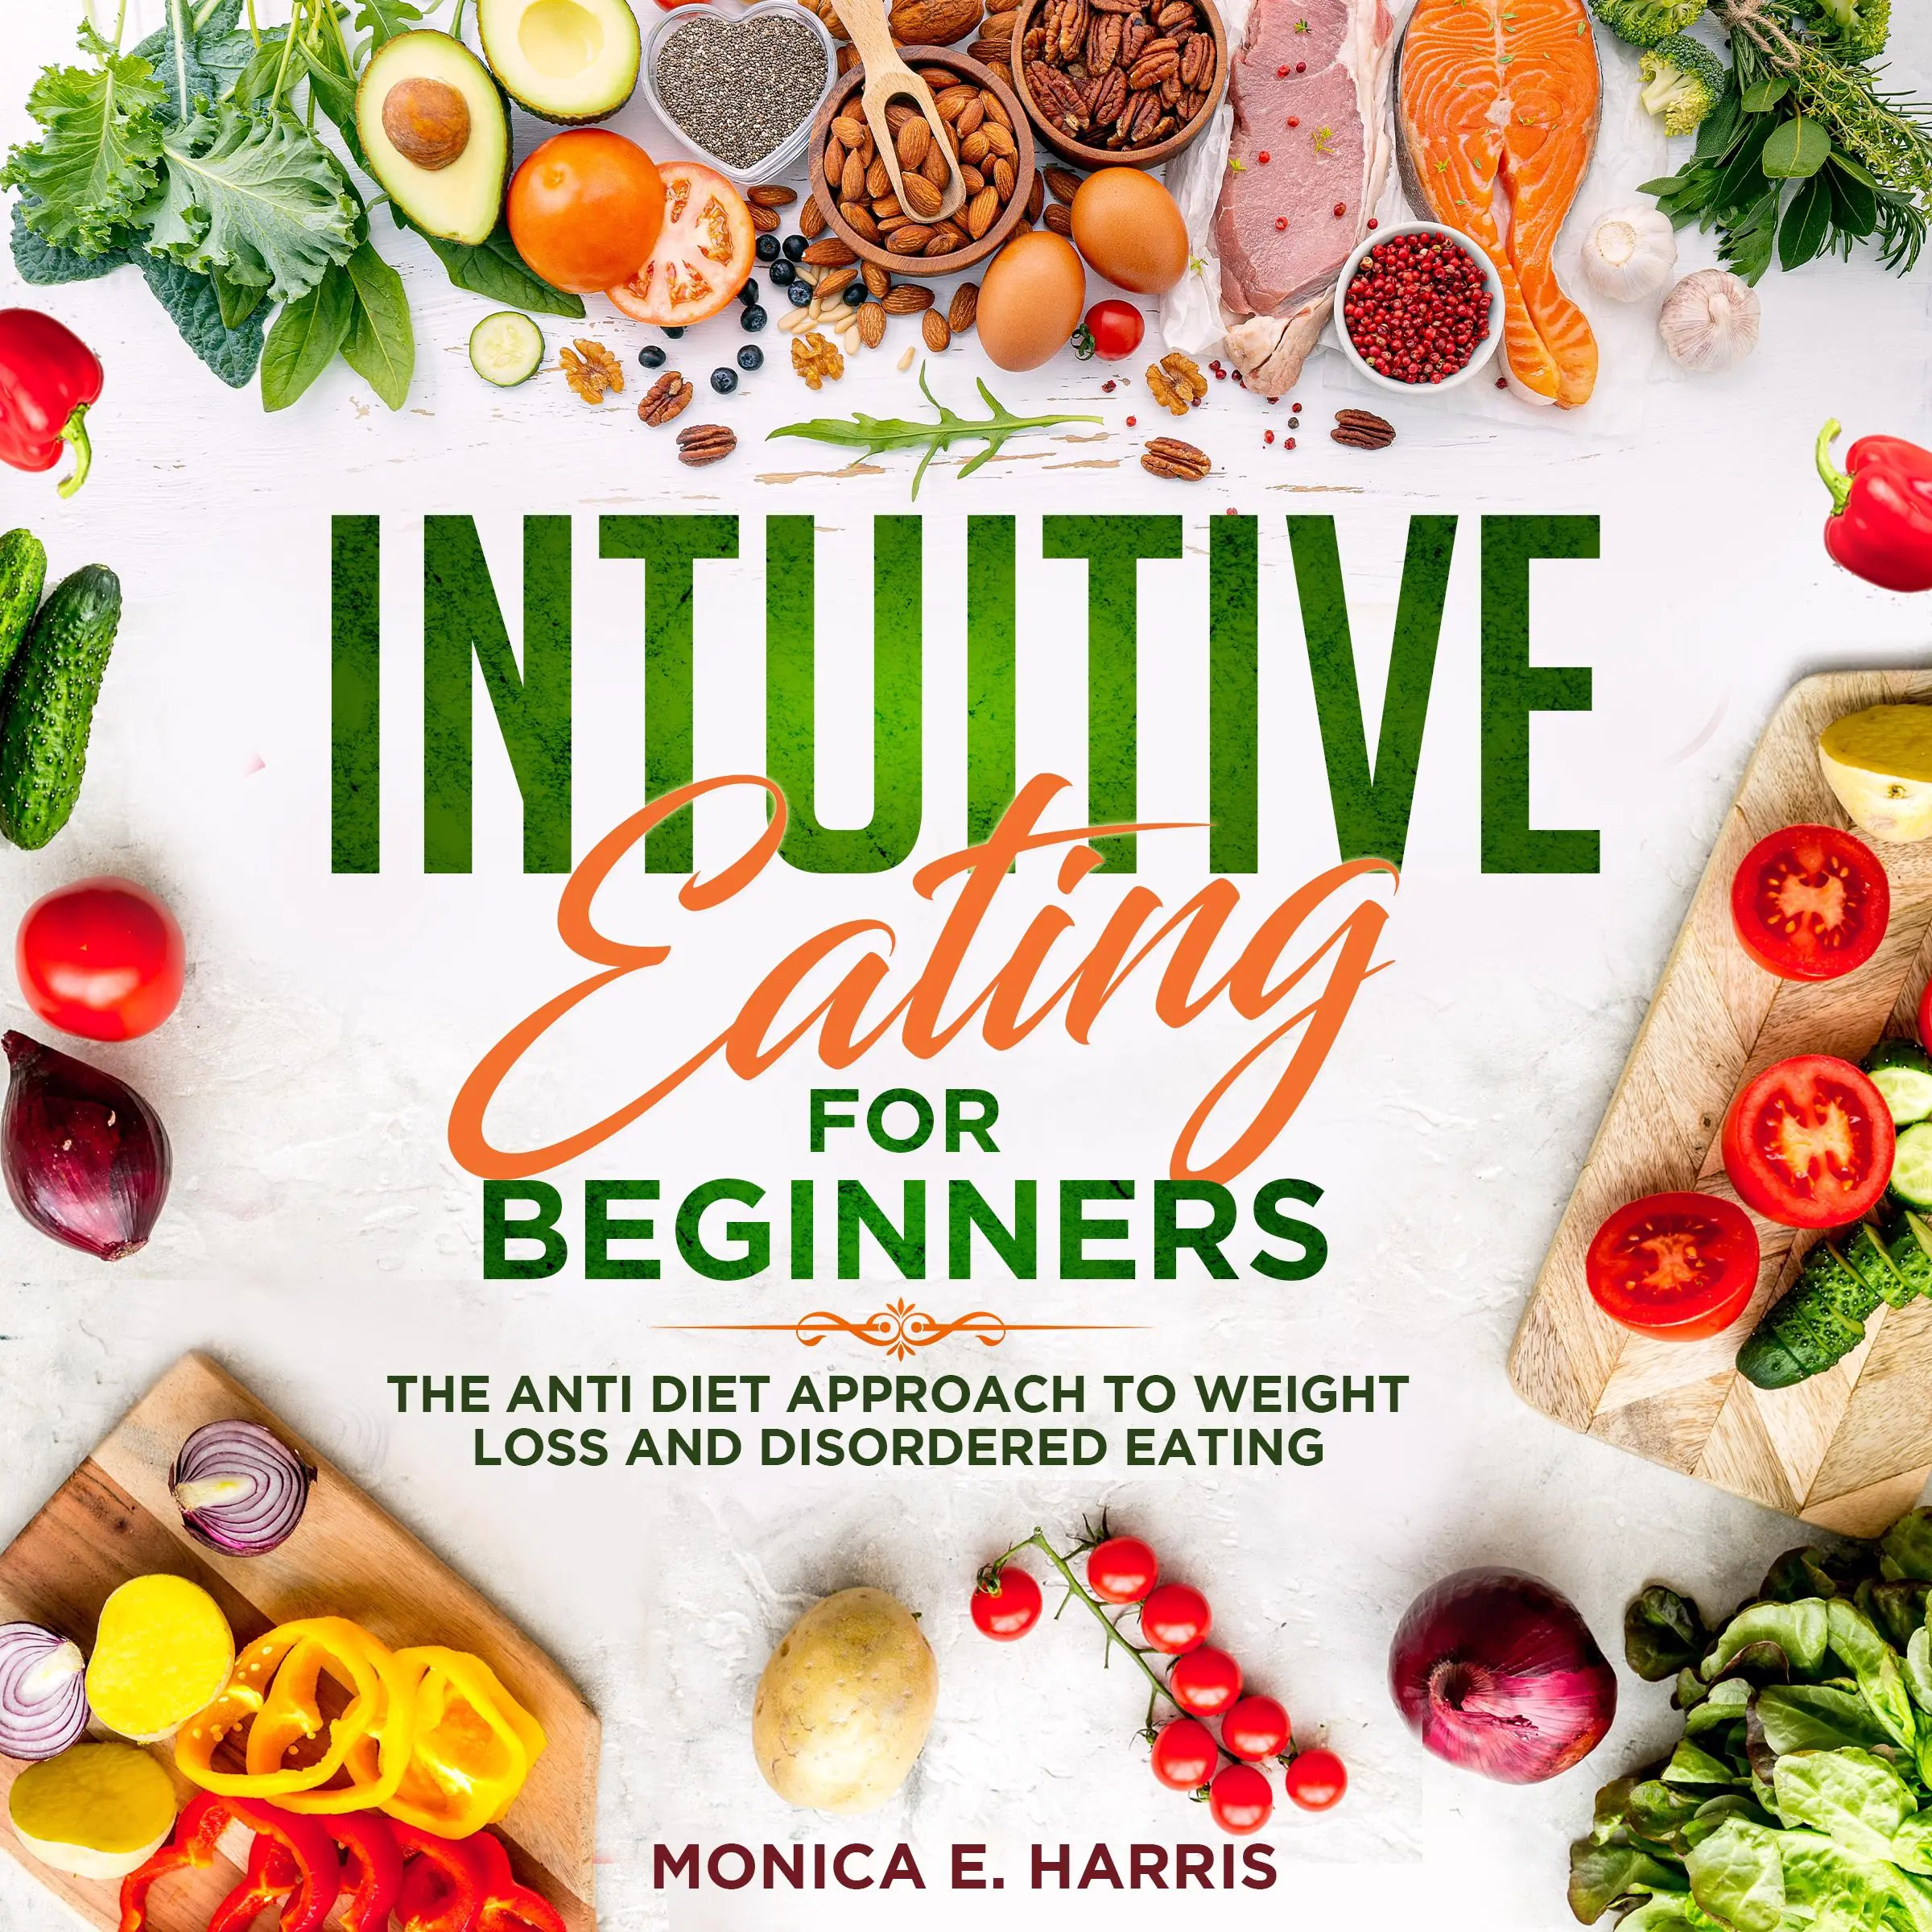 Intuitive Eating for Beginners: The Anti Diet Approach to Weight Loss and Disordered Eating Audiobook by Monica E. Harris